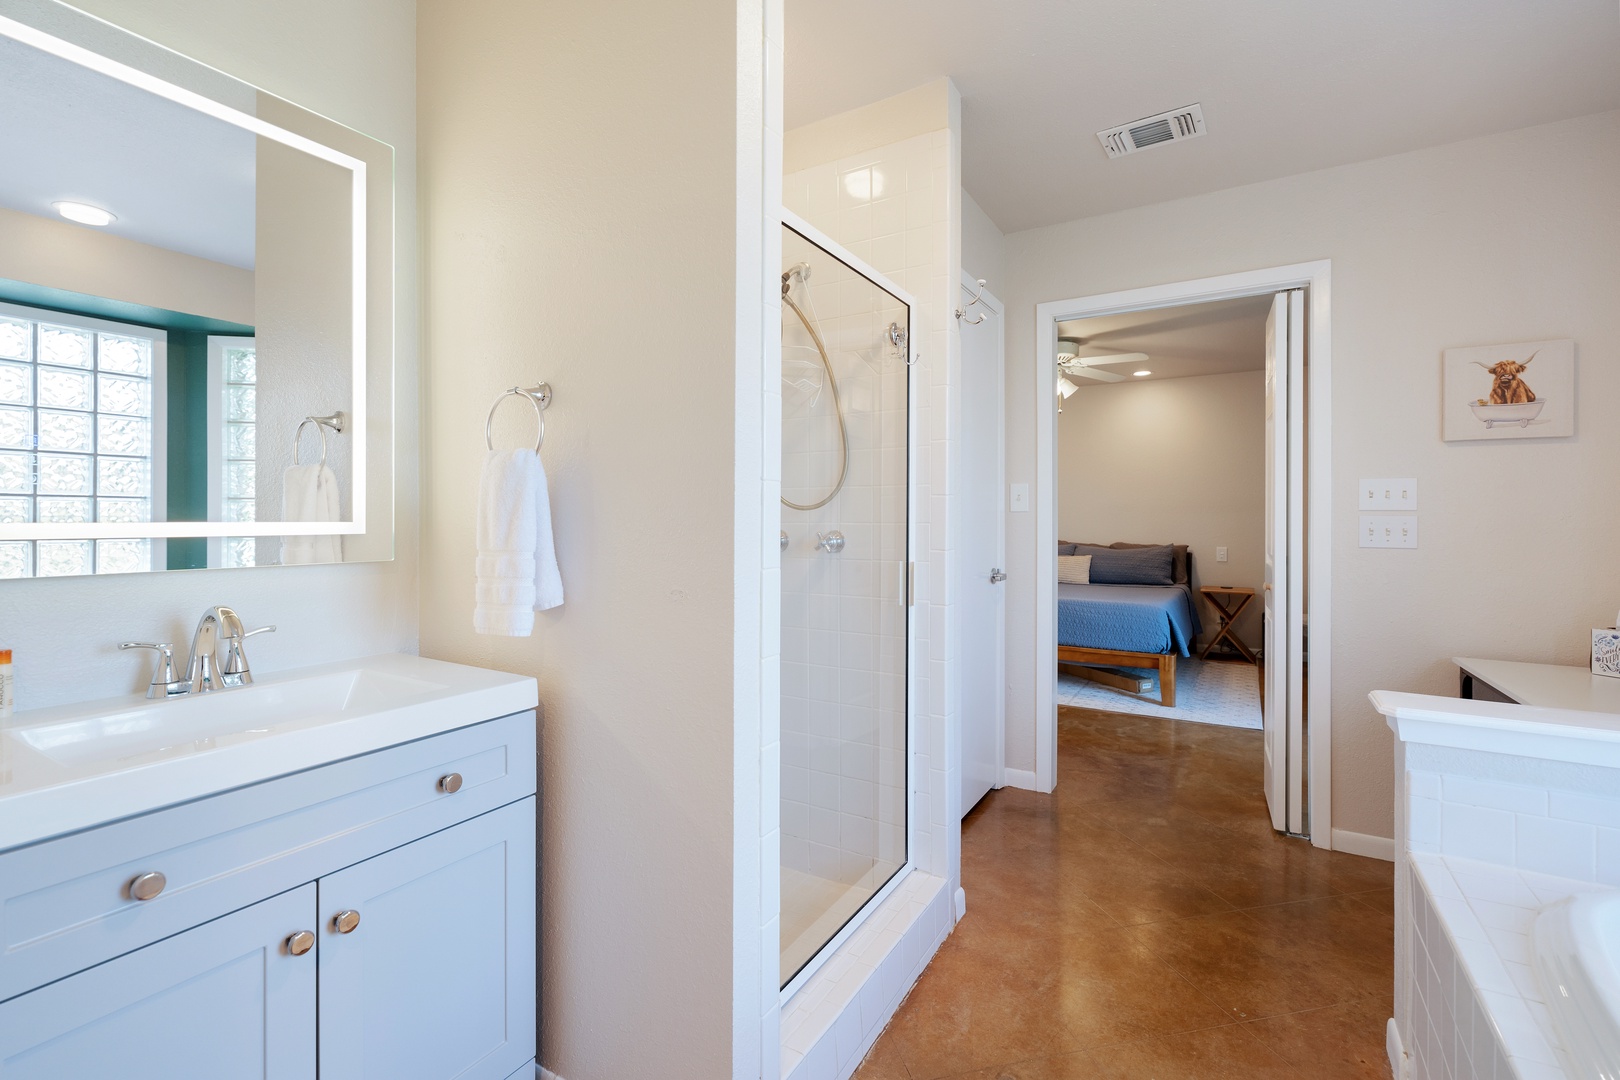 The main house king en suite boasts a jetted soaking tub and glass shower